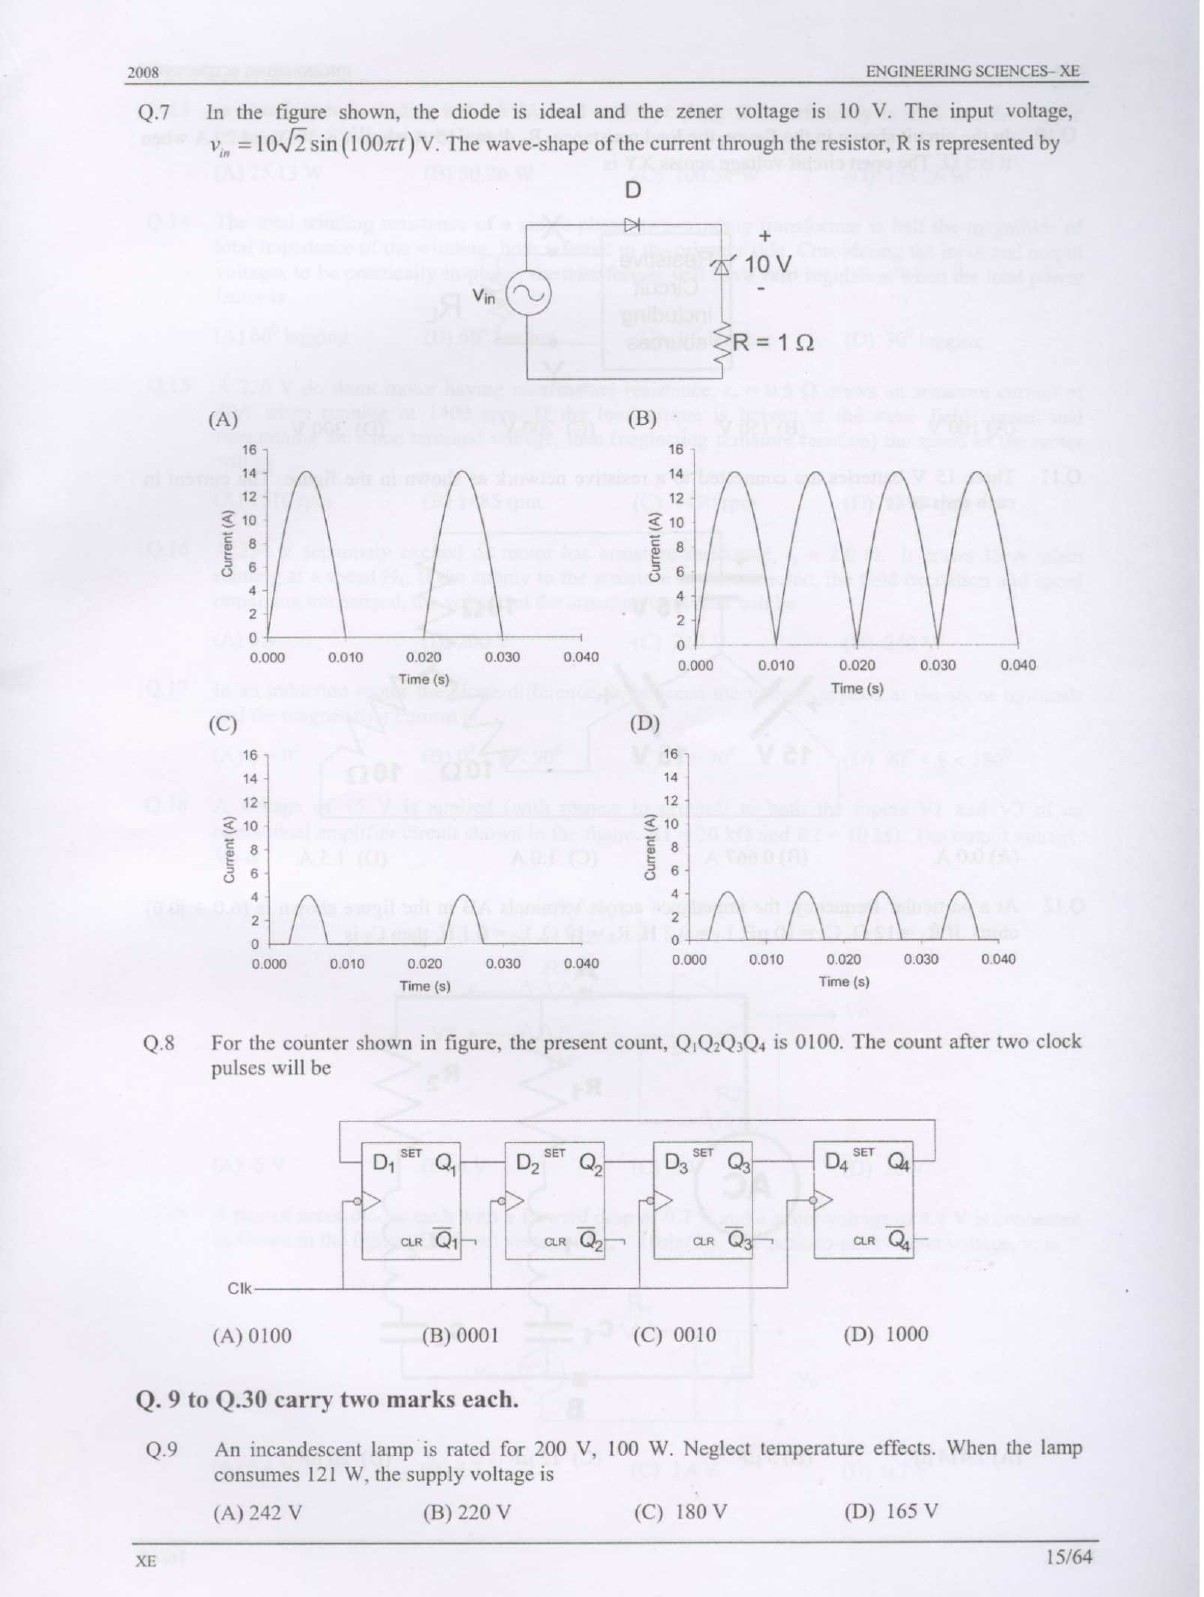 GATE Exam Question Paper 2008 Engineering Sciences 15